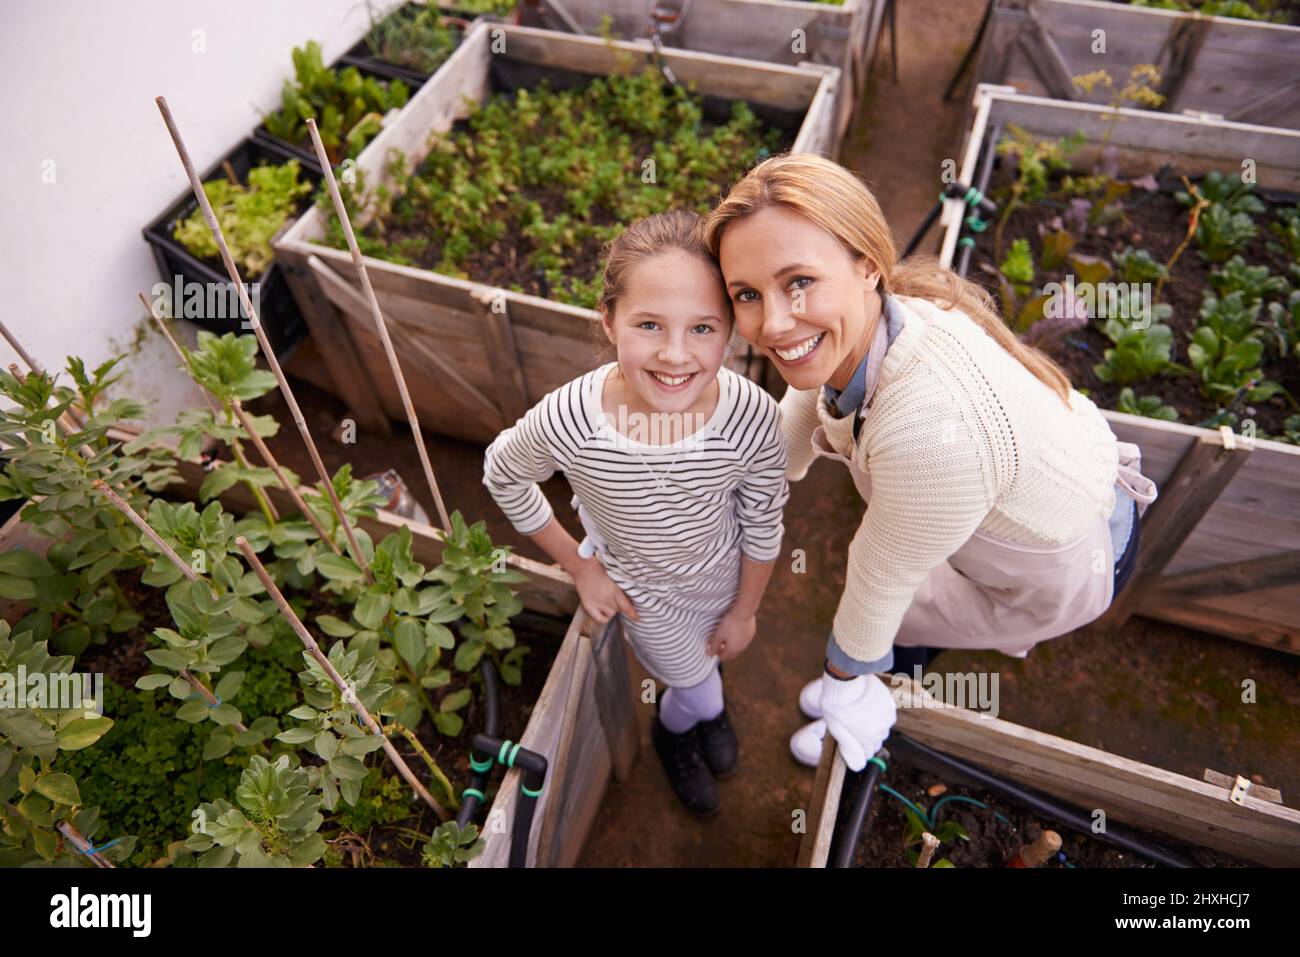 We all have a green thumb. High angle portrait of a mother and daughter gardening together in their backyard. Stock Photo